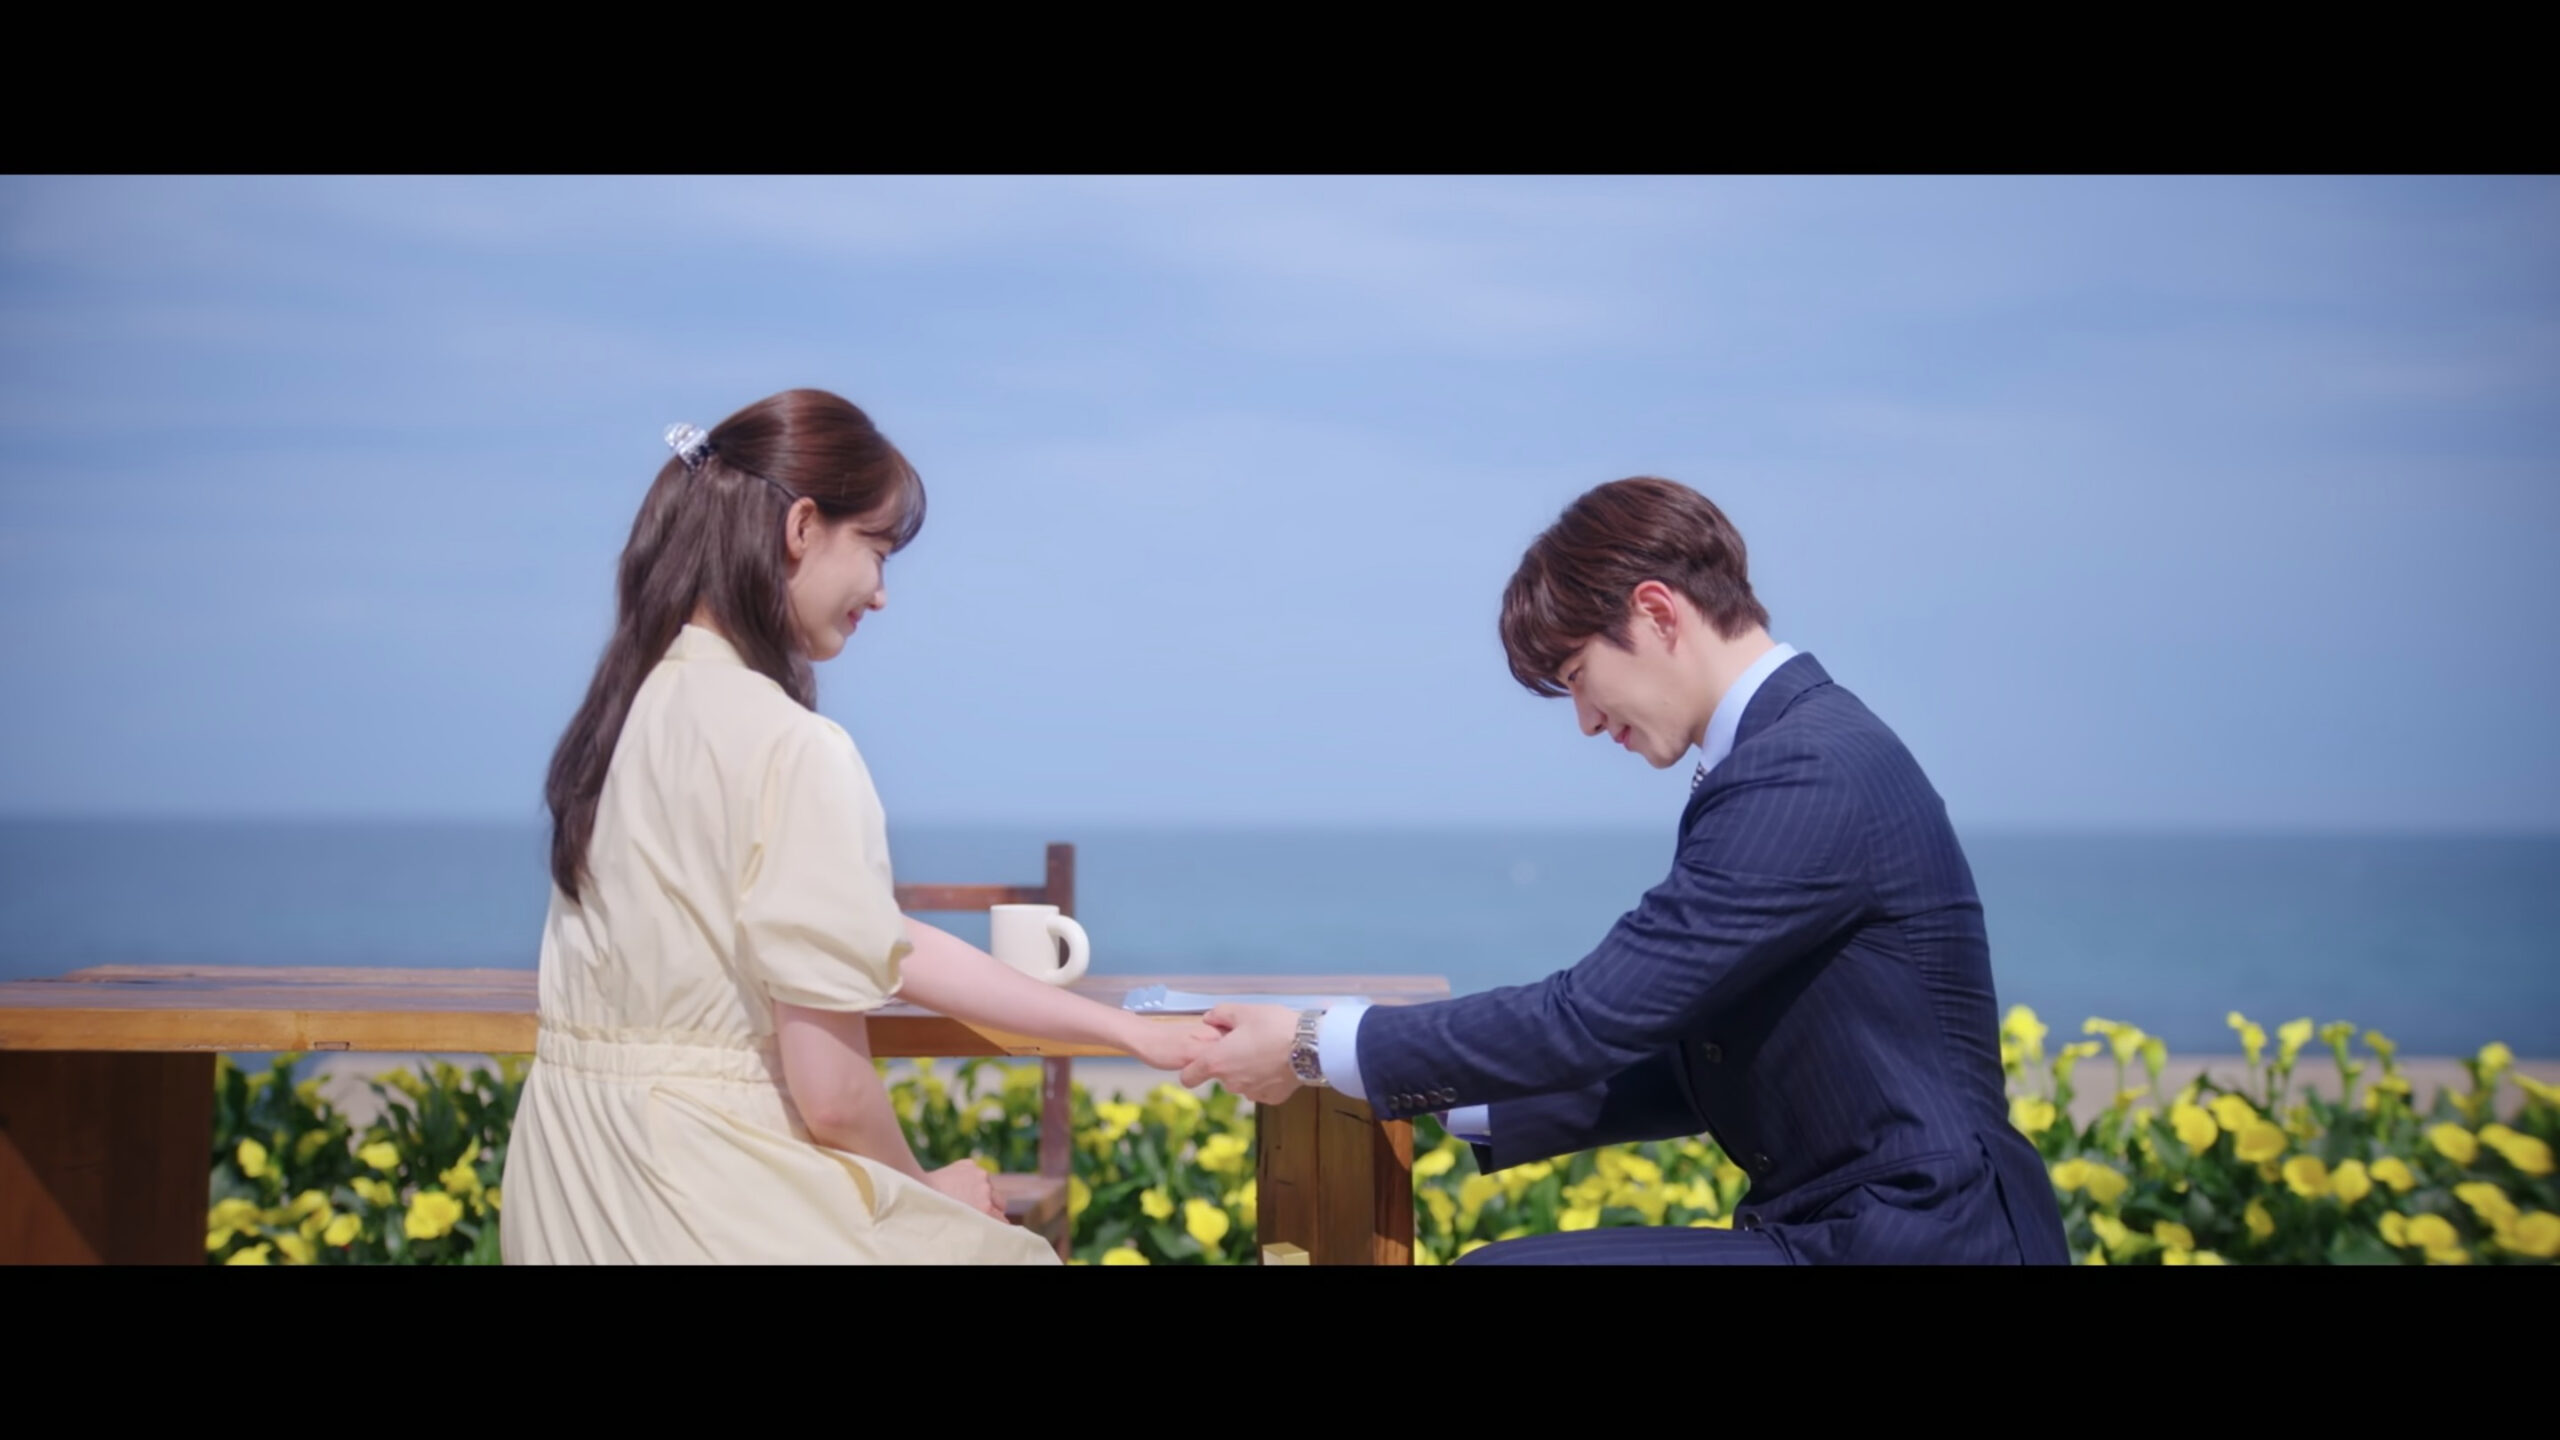 Junho and Yoona King the Land: Episodes 15-16 (Final)